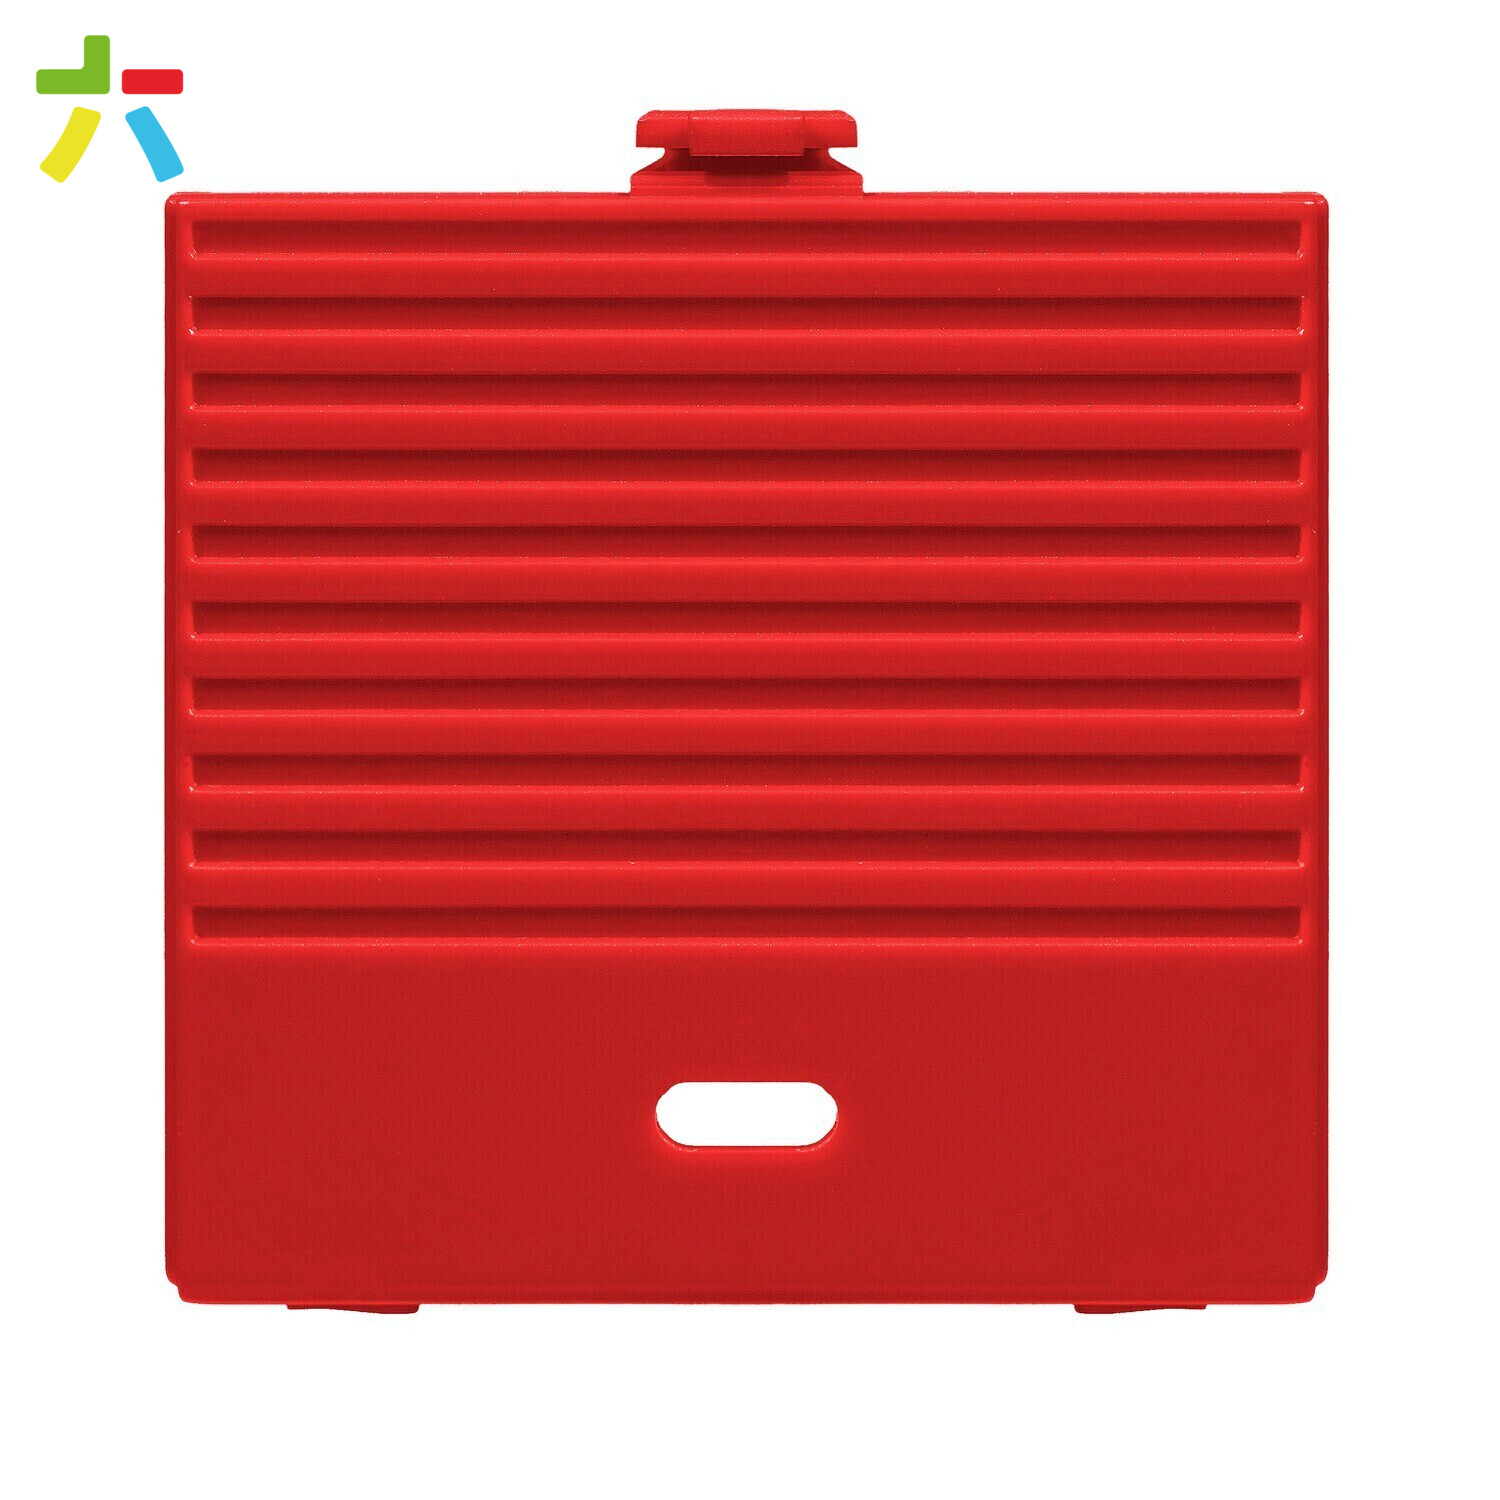 Game Boy Original USB-C Battery Cover (Solid Red)